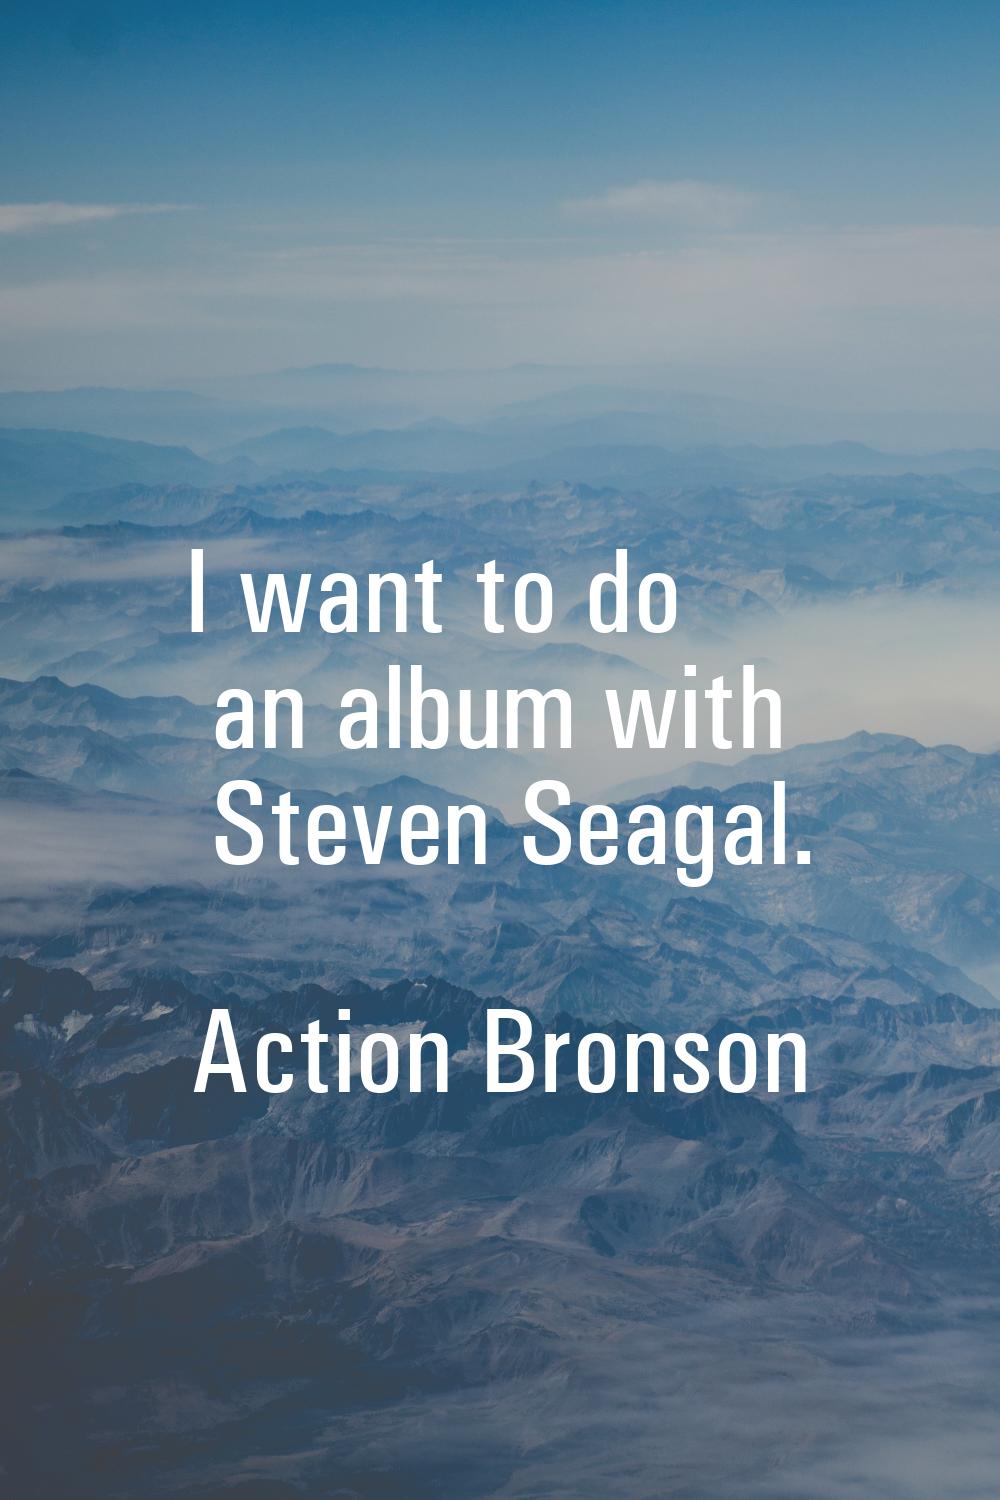 I want to do an album with Steven Seagal.